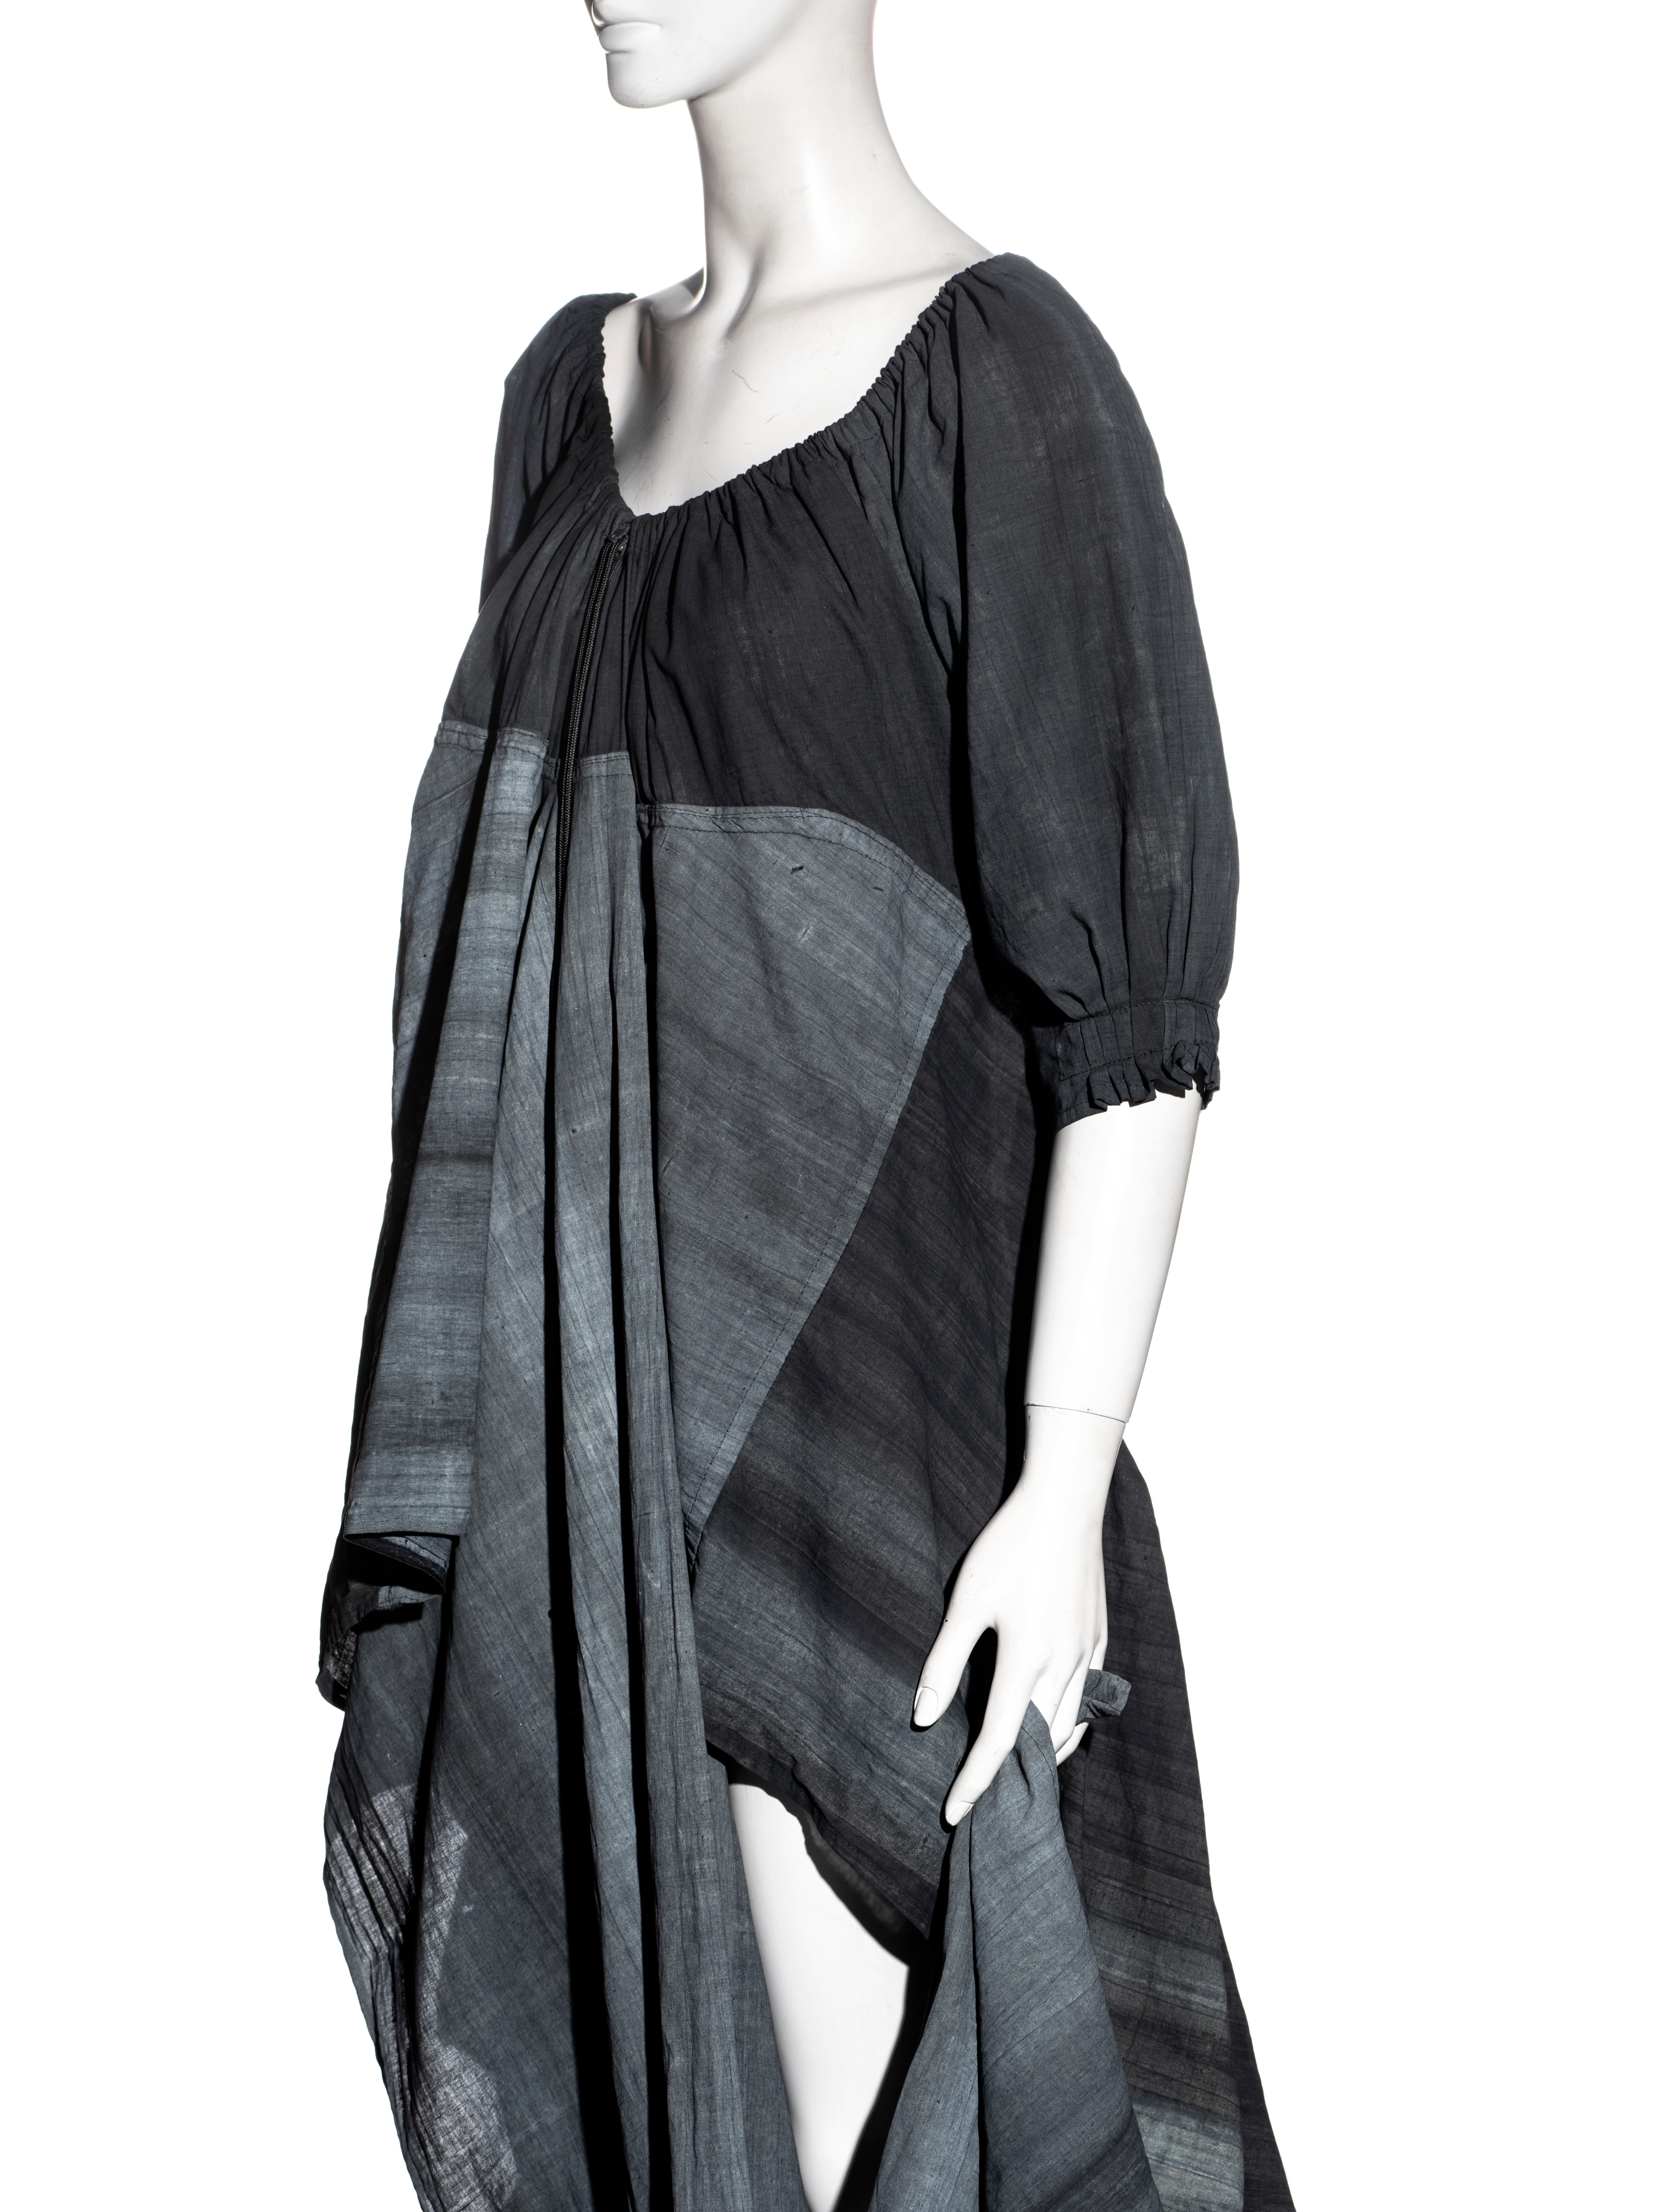 Black Worlds End by Vivienne Westwood and Malcolm McLaren grey smock dress, ss 1983 For Sale